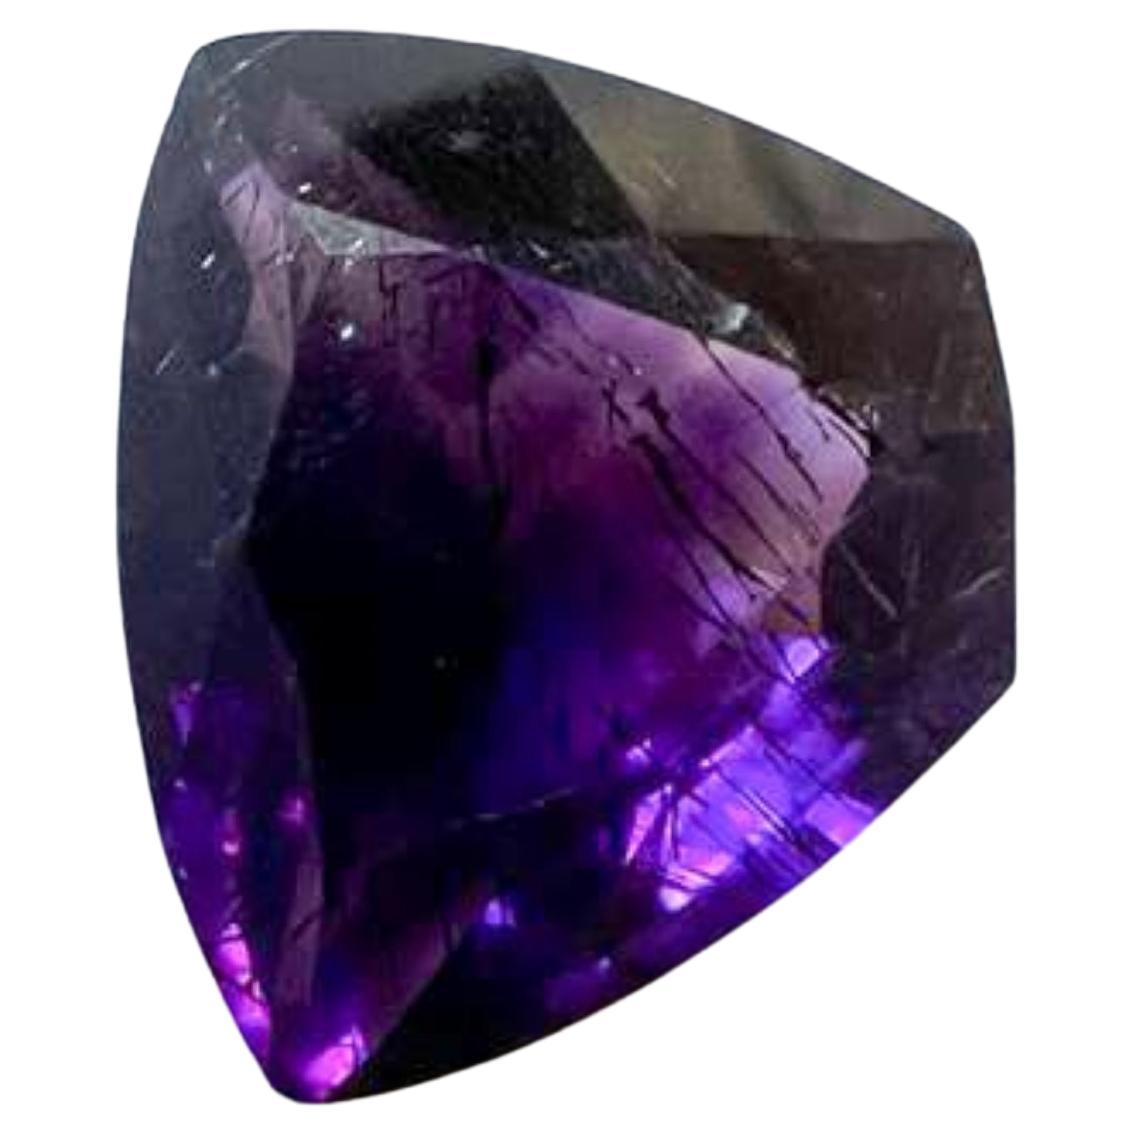 Unleash your creativity with the extraordinary beauty of this 8.63ct Natural Untreated Rutiled Purple Custom Cut Amethyst Loose Gemstone, shaped like a distinctive triangle with a blunt tip. Its estimated measurements and unique shape open up